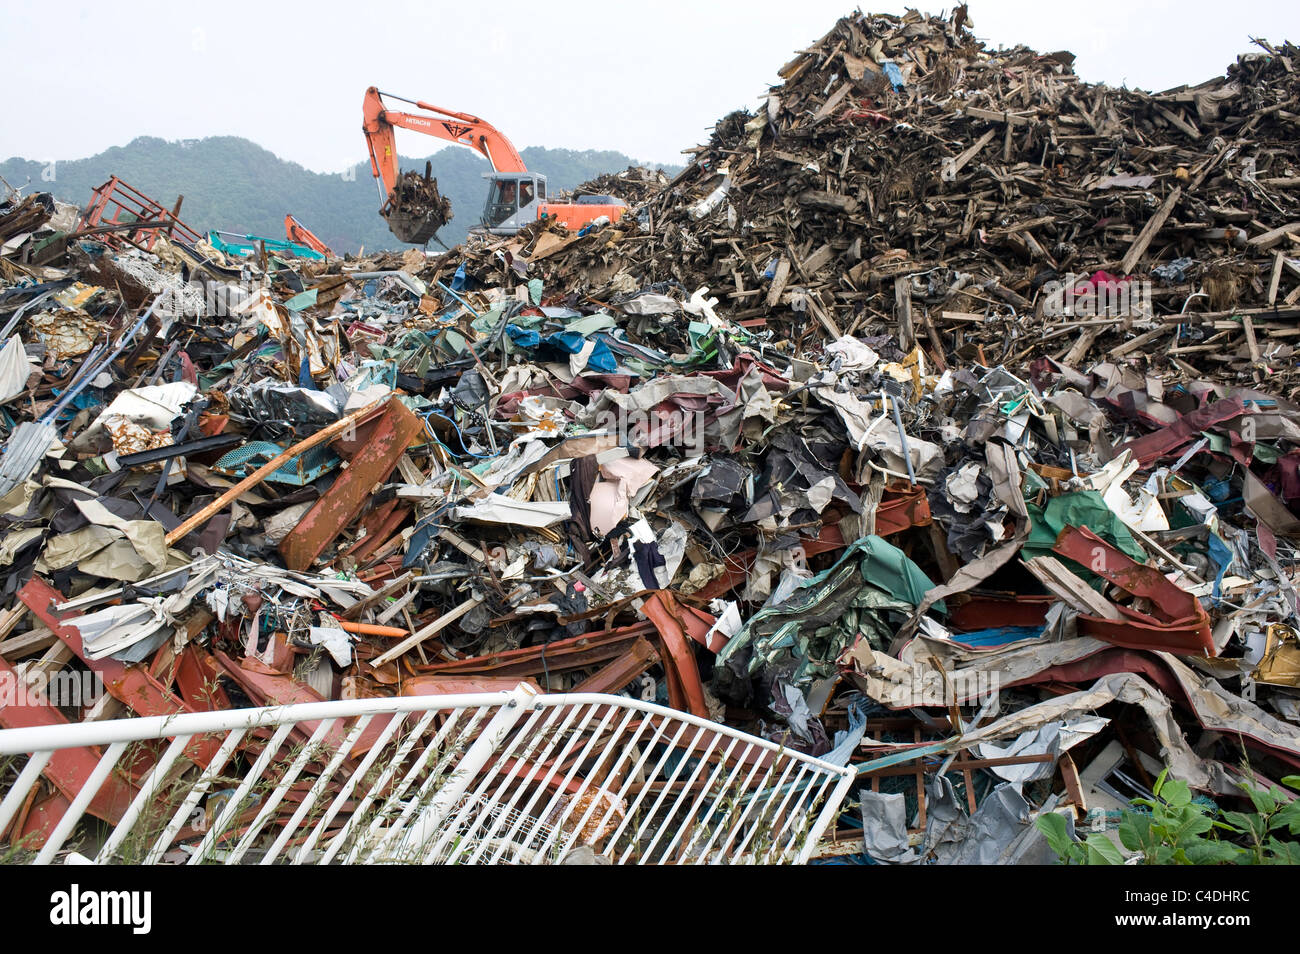 Three months after the magnitude 9 quake and tsunamis hit northeastern Japan, workers are still sifting through the debris Stock Photo